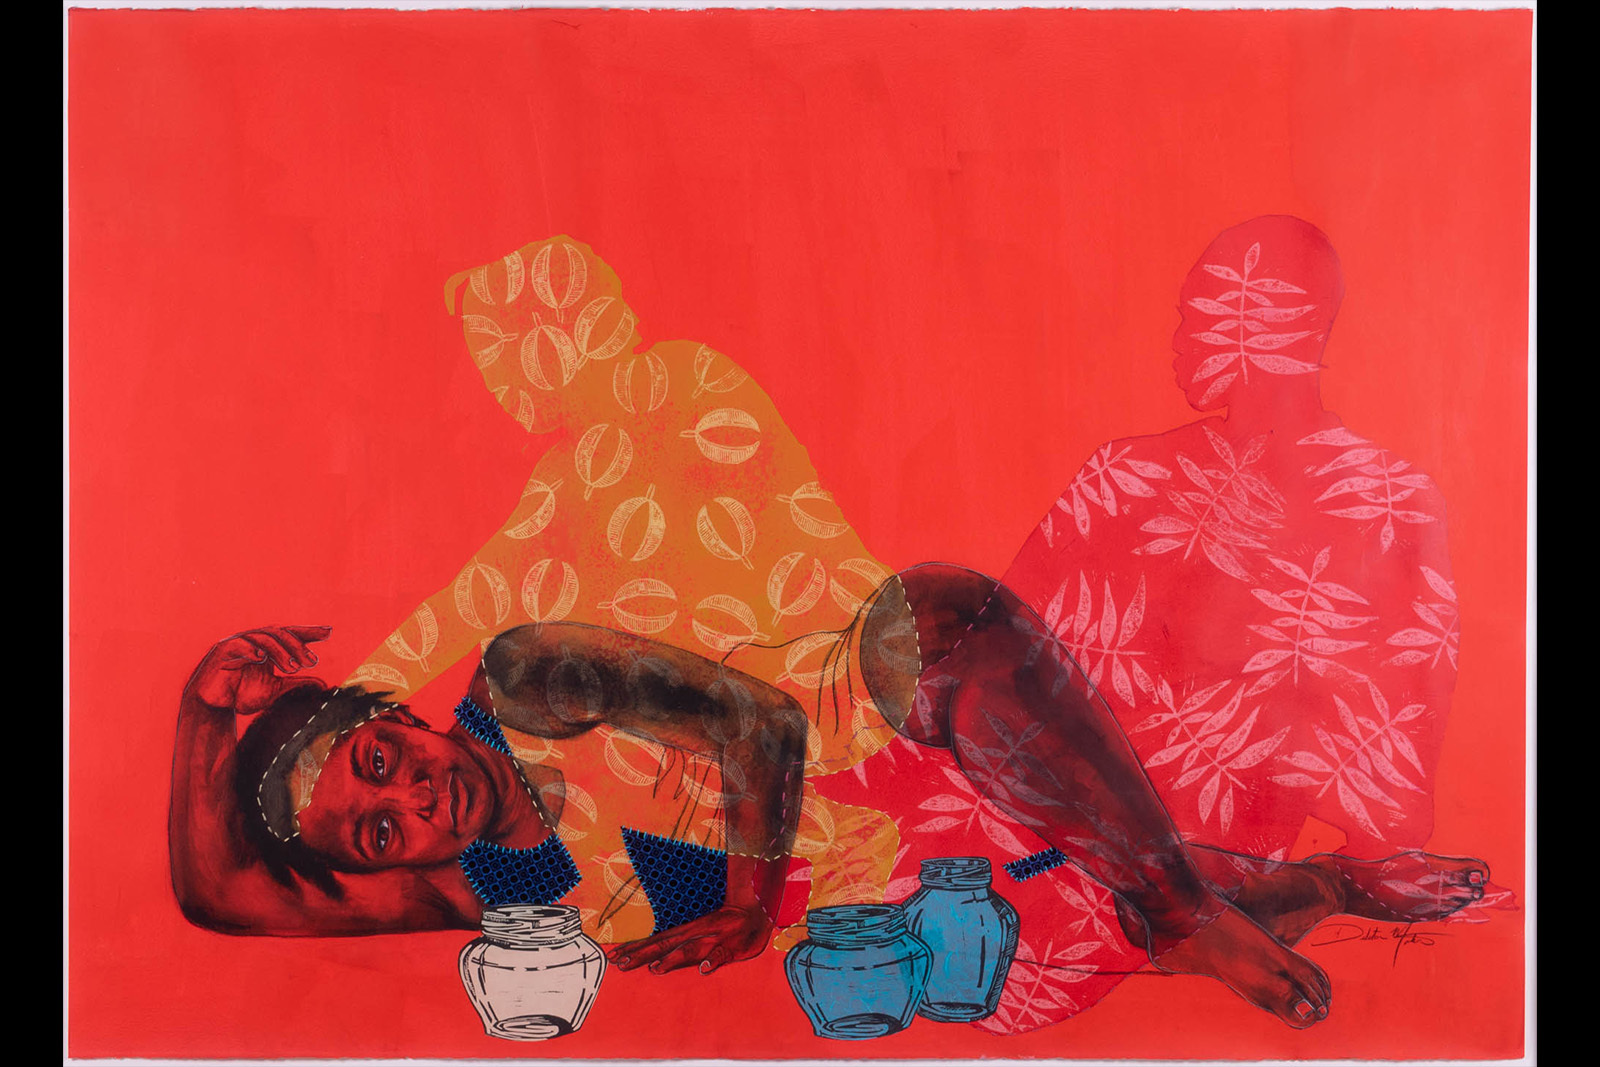 Delita Martin mixed media work among shadows shows a figure reclining on her side while two human shillouhettes sit beside her